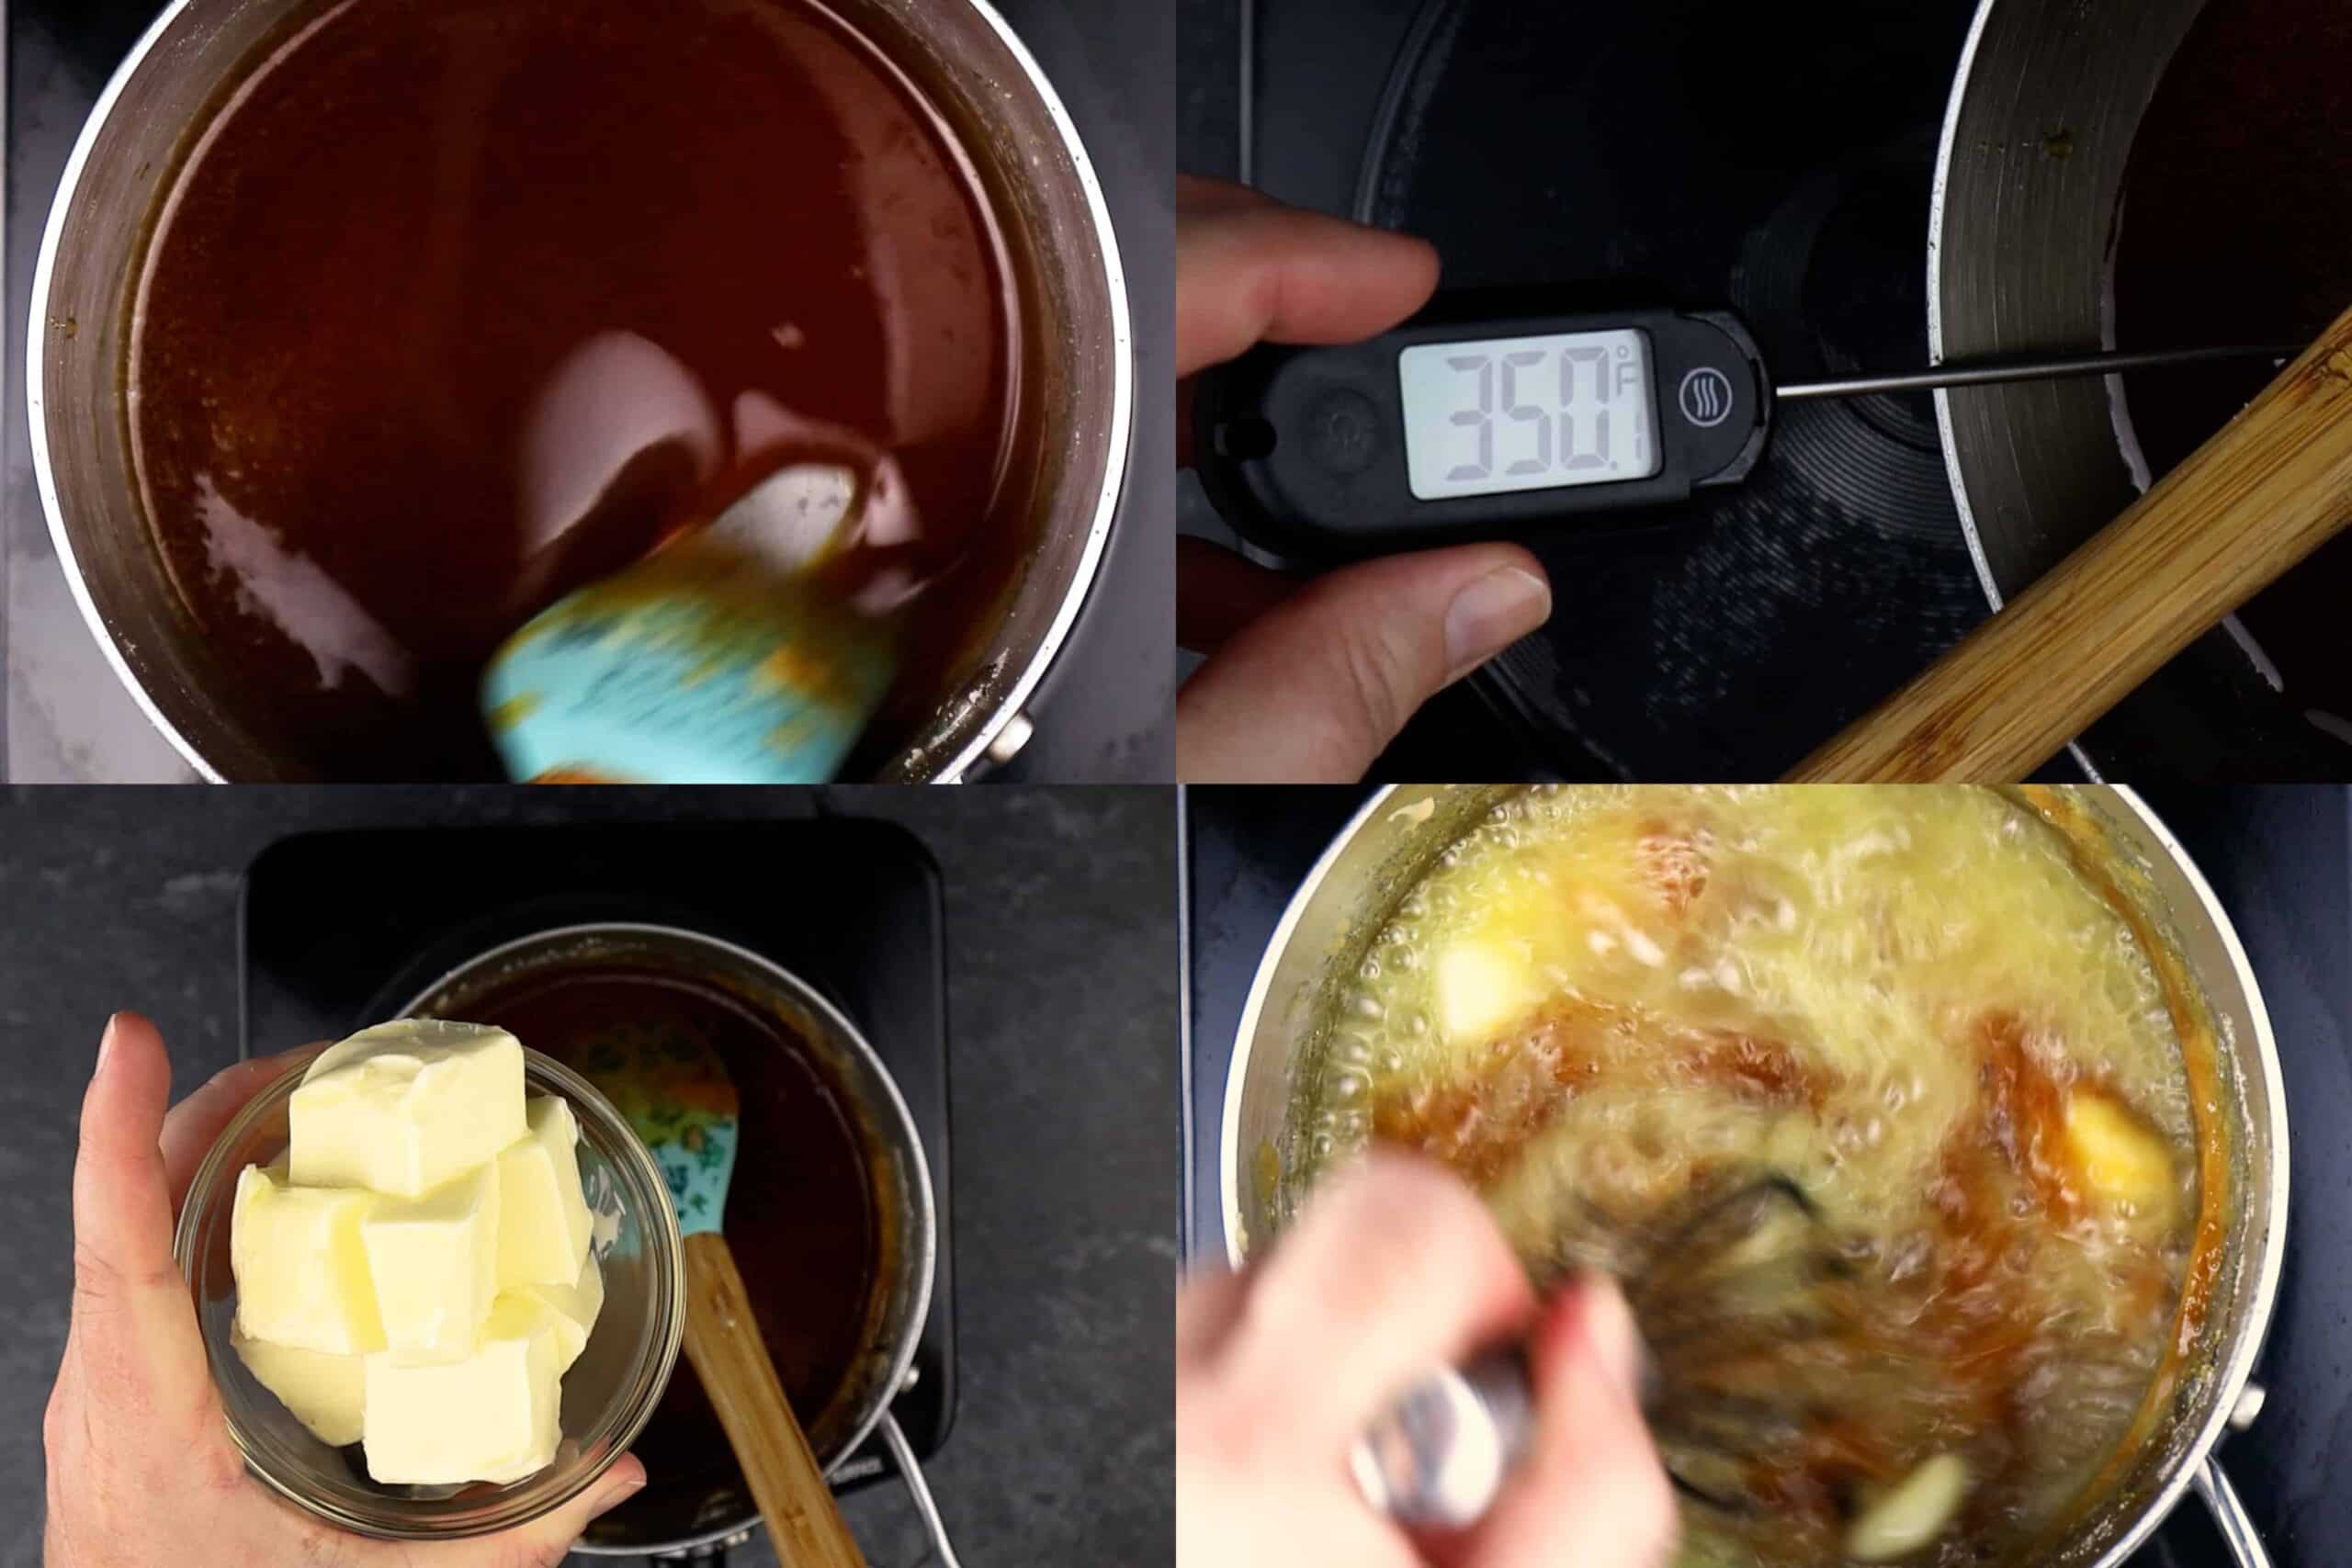 Getting sugar to temp and adding butter